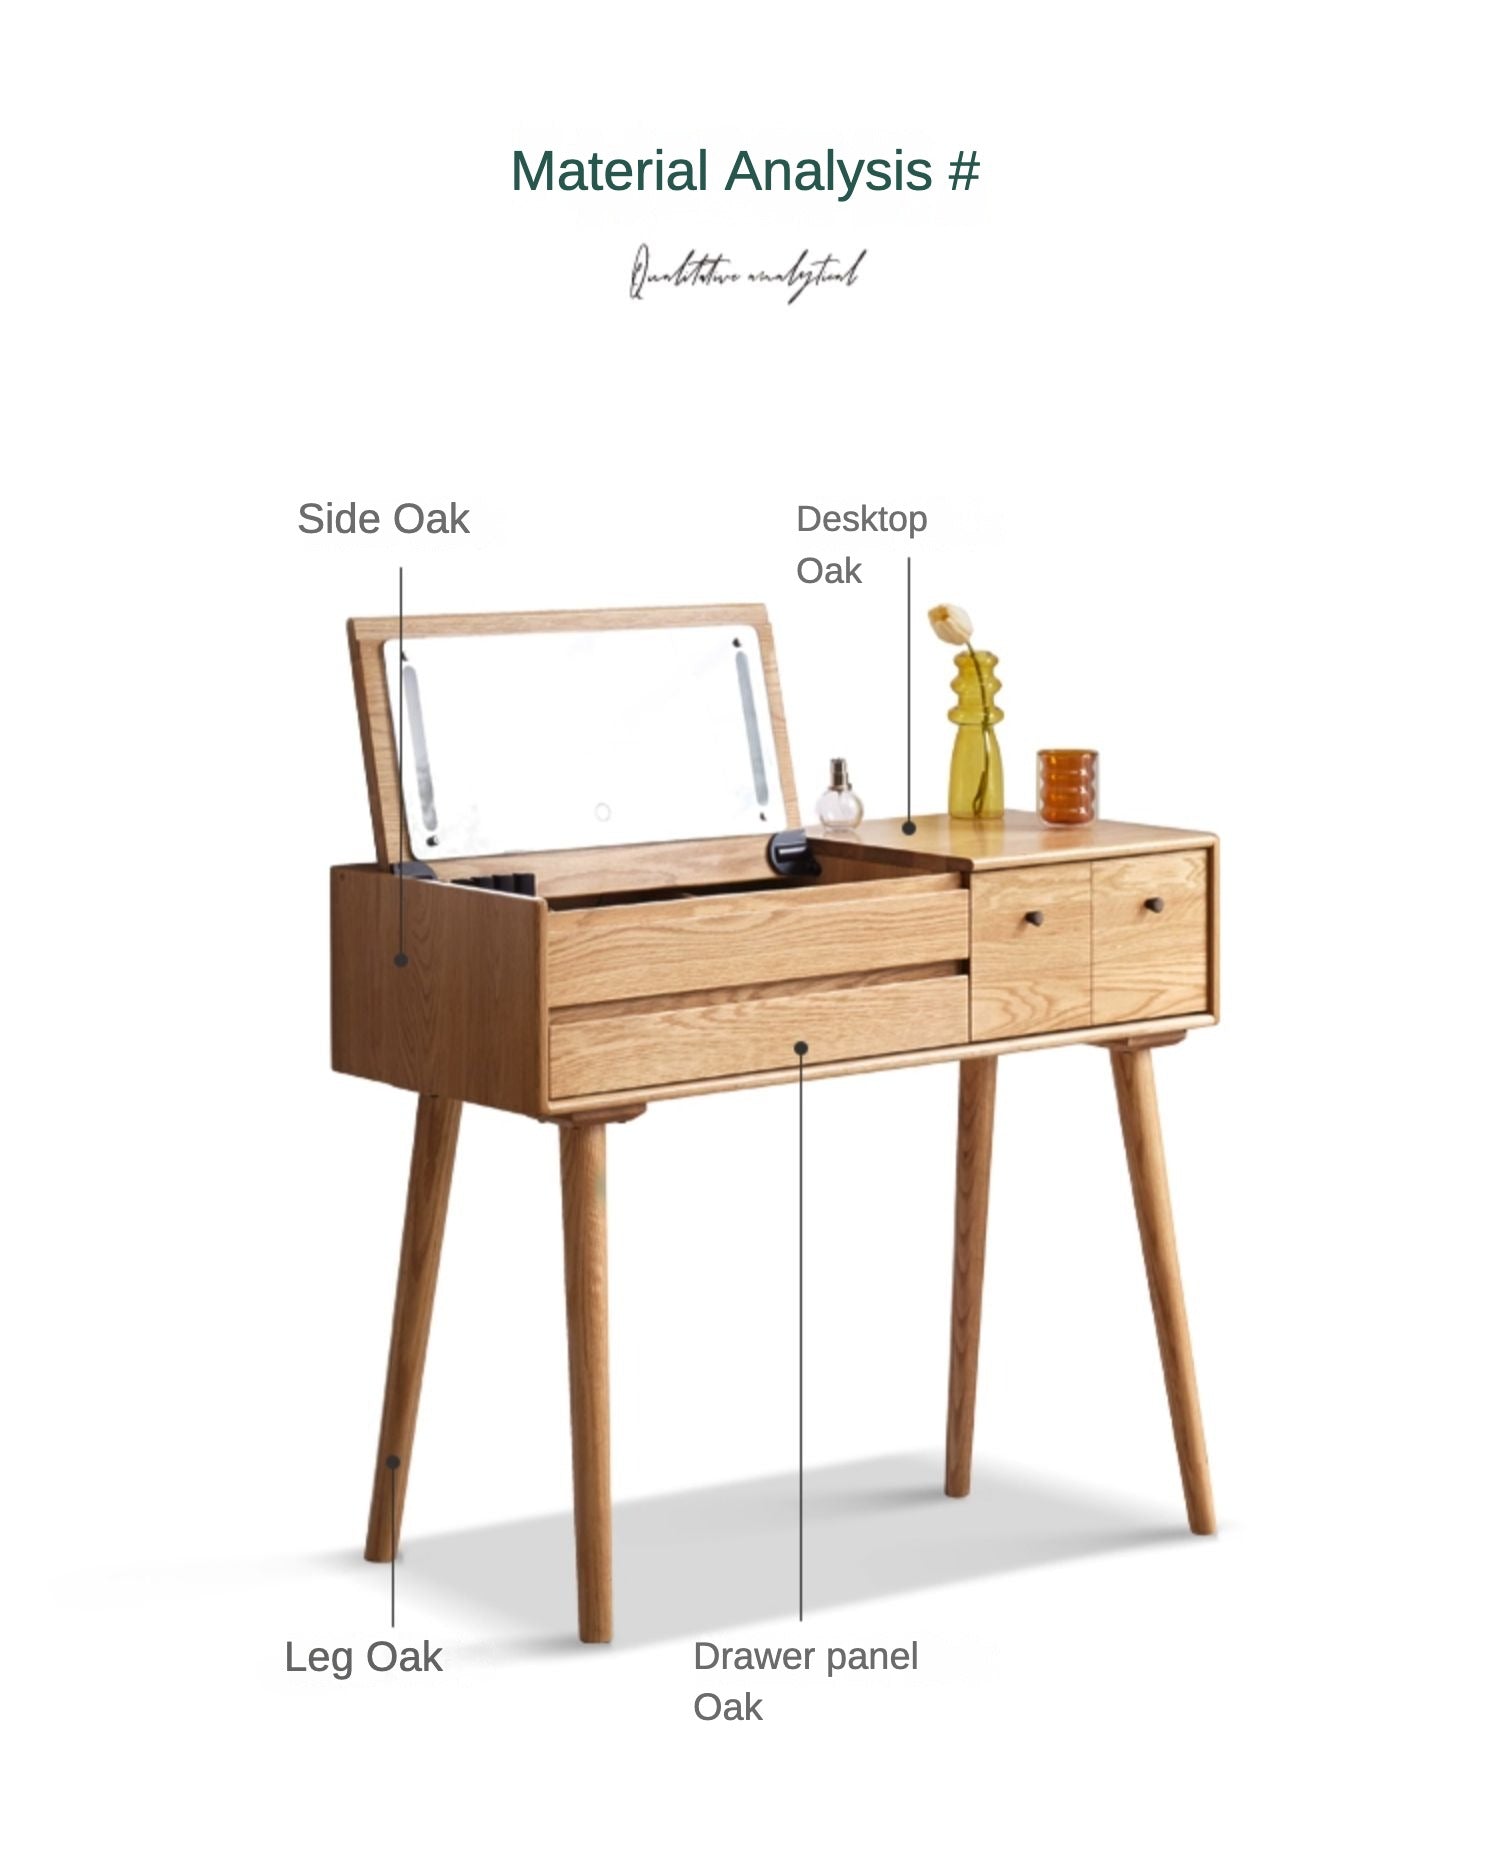 Oak solid wood Dressing table Mirror LED touch light: